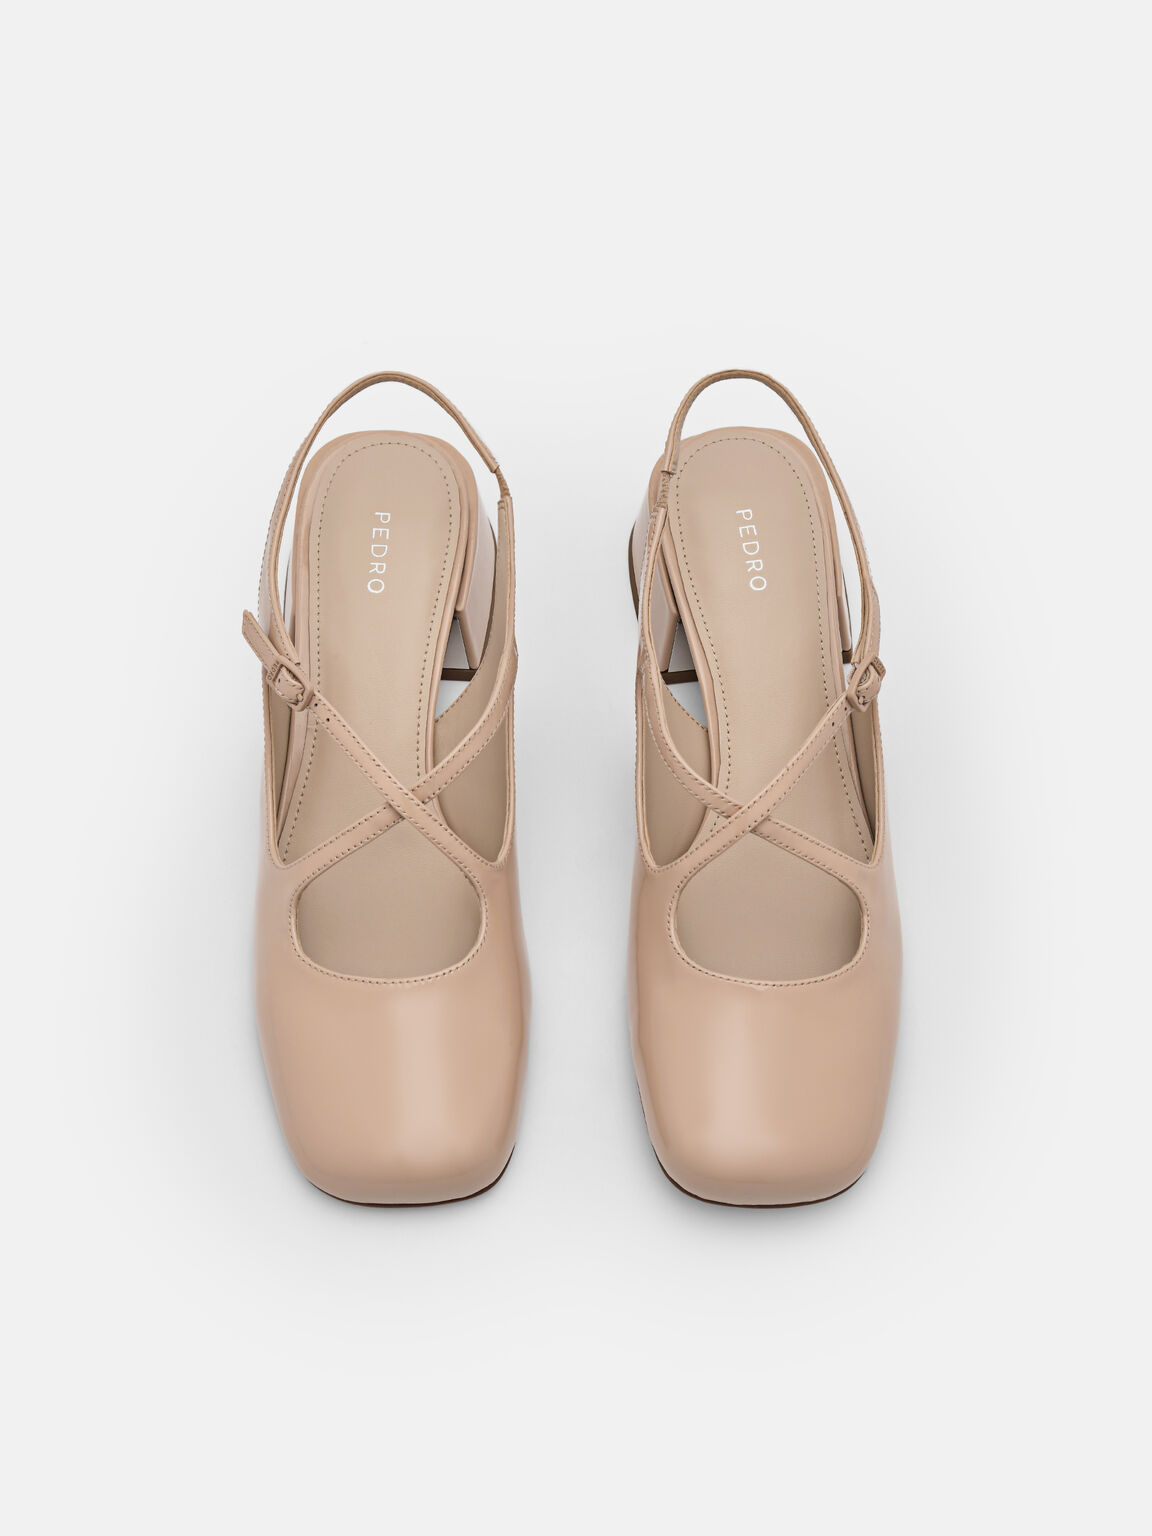 Effie Leather Mary Jane Pumps, Nude, hi-res